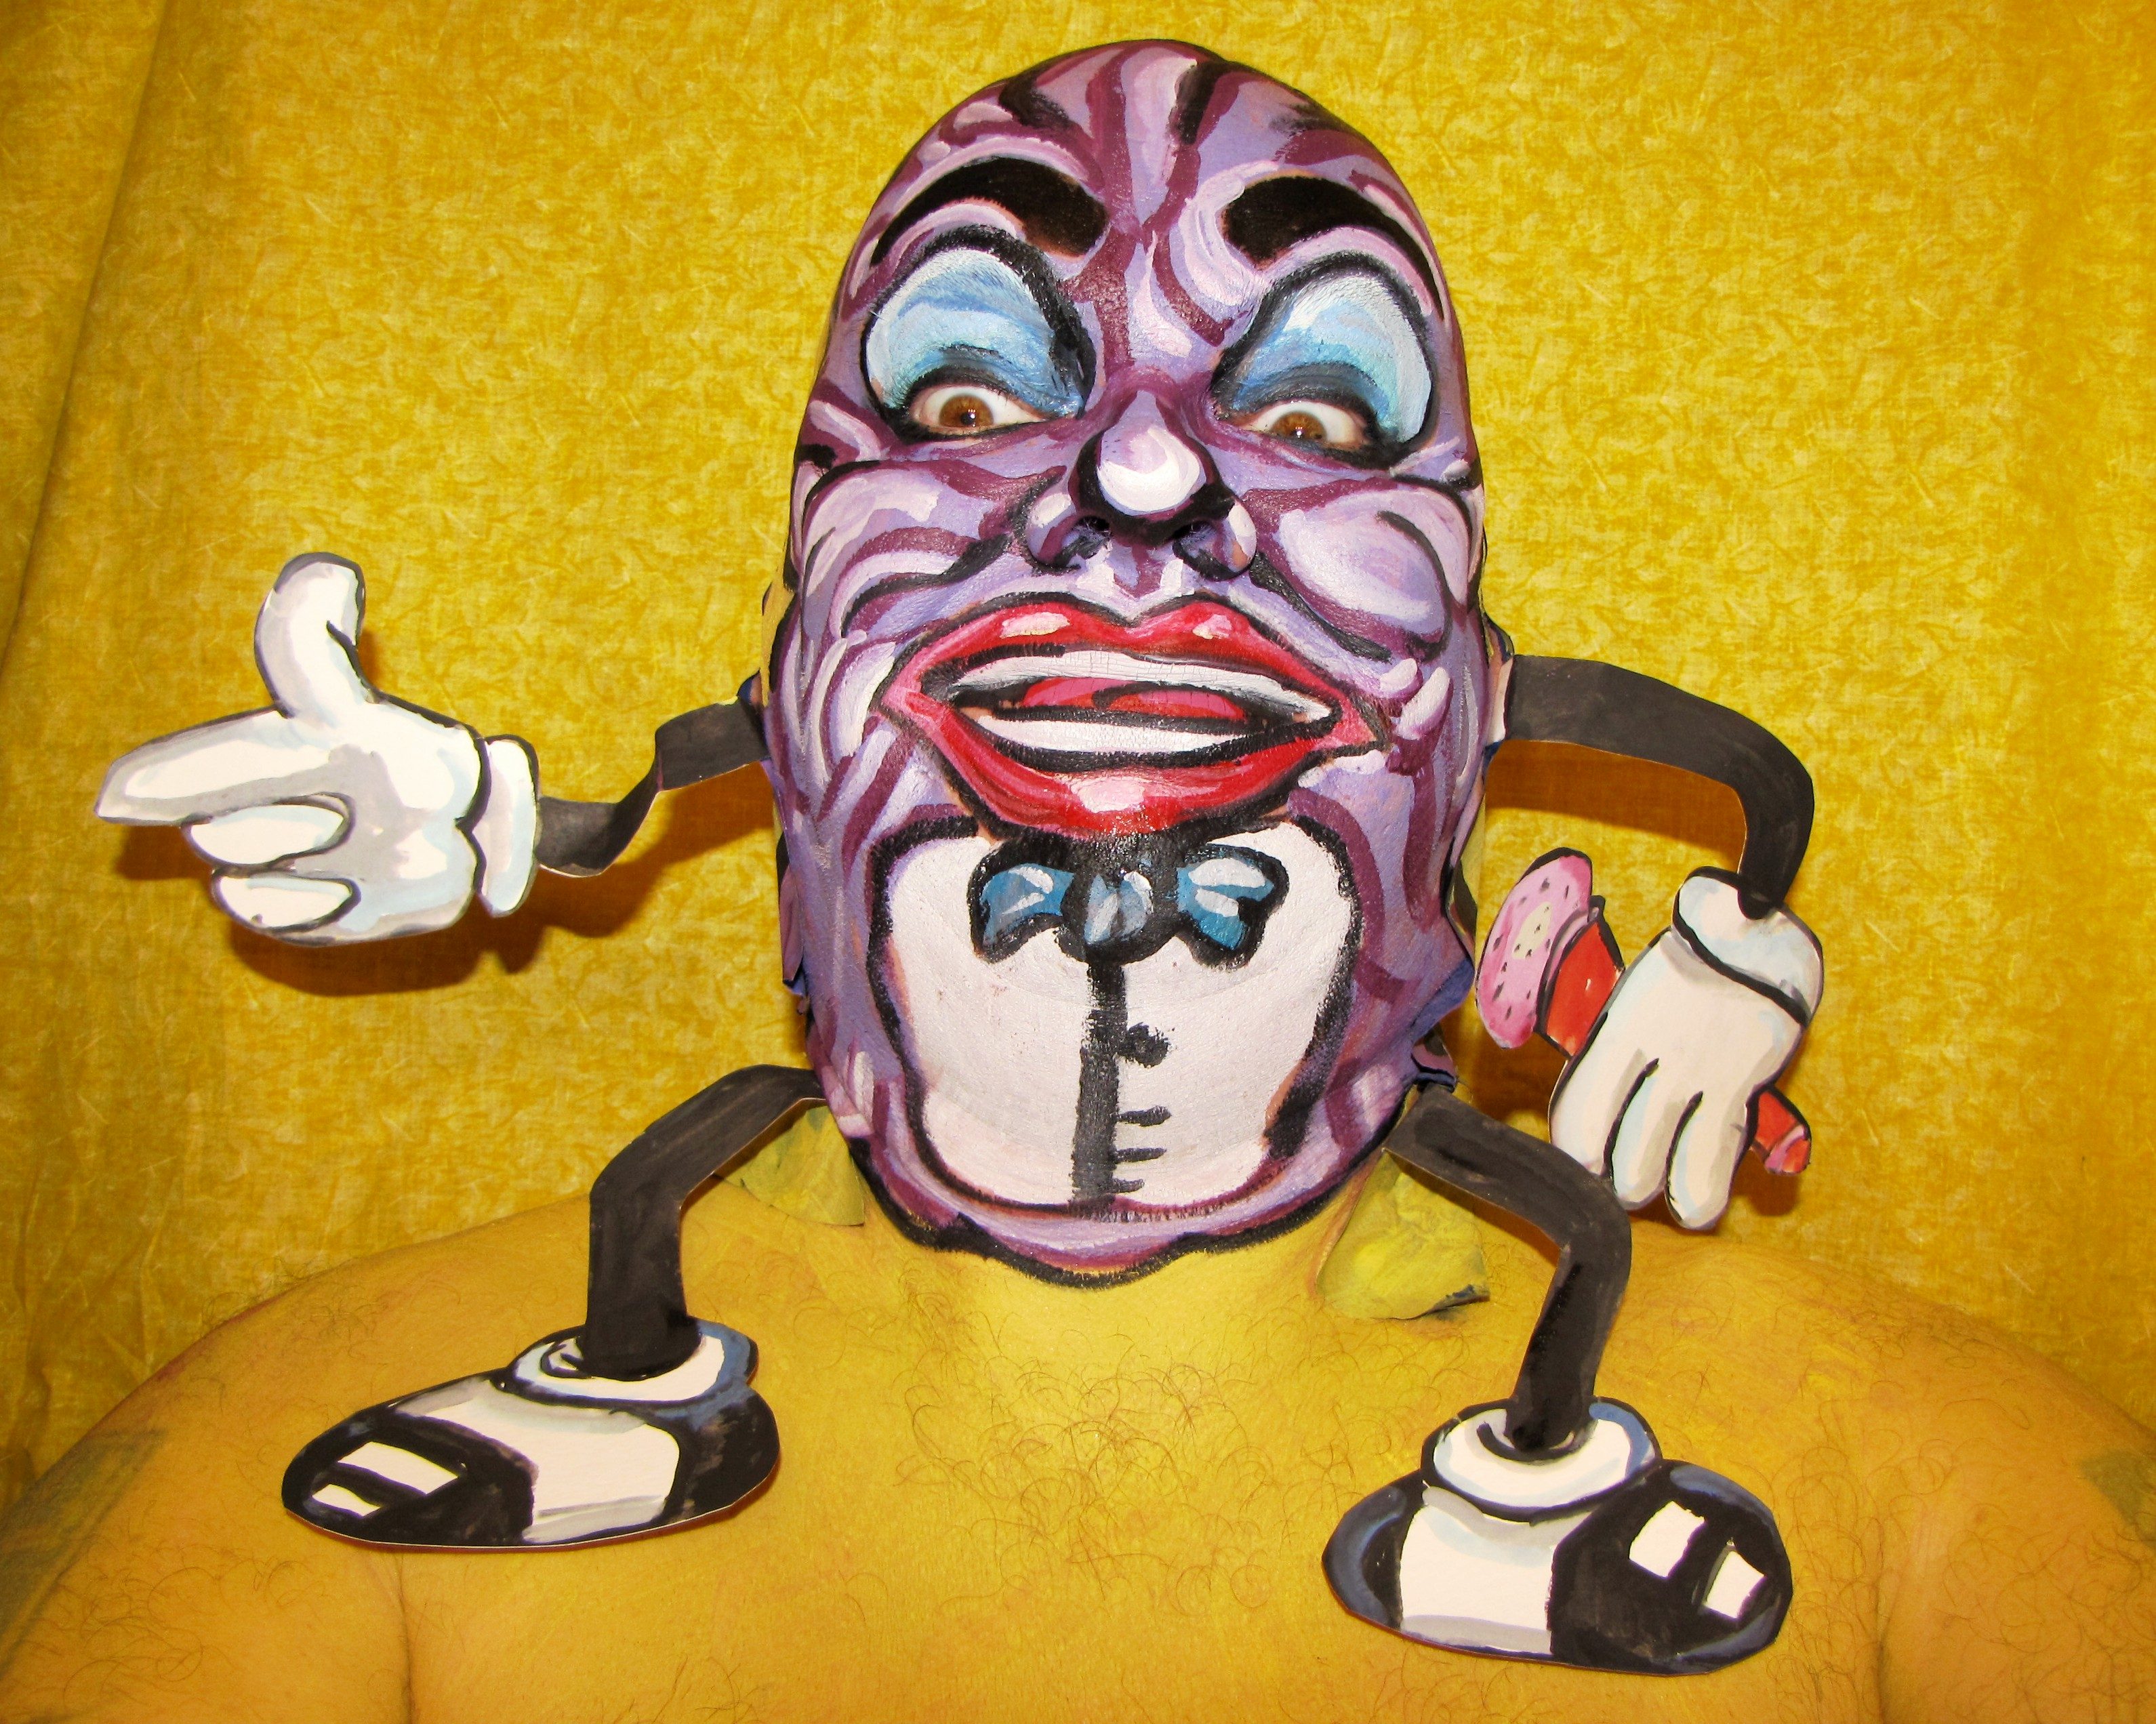 Exclusive to Rex Features Mandatory Credit: Photo by James Kuhn/Shutterstock (1033442y) California raisin James Kuhn Facepaint, Michigan, America - Nov 2009 FULL WORDS: http://www.rexfeatures.com/nanolink/52vc Wacky artist James Kuhn wowed the world by painting his own face every day for a year. Now the 47-year-old from Three Oaks, Michigan is doing it again - and his work is better than ever. Imaginative James decided to come up with a new face every day, with designs ranging from cartoon characters to some of his favourite foods. And one again he will put a smile on YOUR face with crazy caricatures of Superman, Charlie Brown, Wonder Woman and Evel Knievel. There are also poignant tributes to Michael Jackson and Mollie Sugden, the British actress famous for her role as Mrs Slocombe in sitcom Are You Being Served? He has also daubed other creations including a mummy, Freddie Kruger, a golf tee Santa and a rabid pit bull!